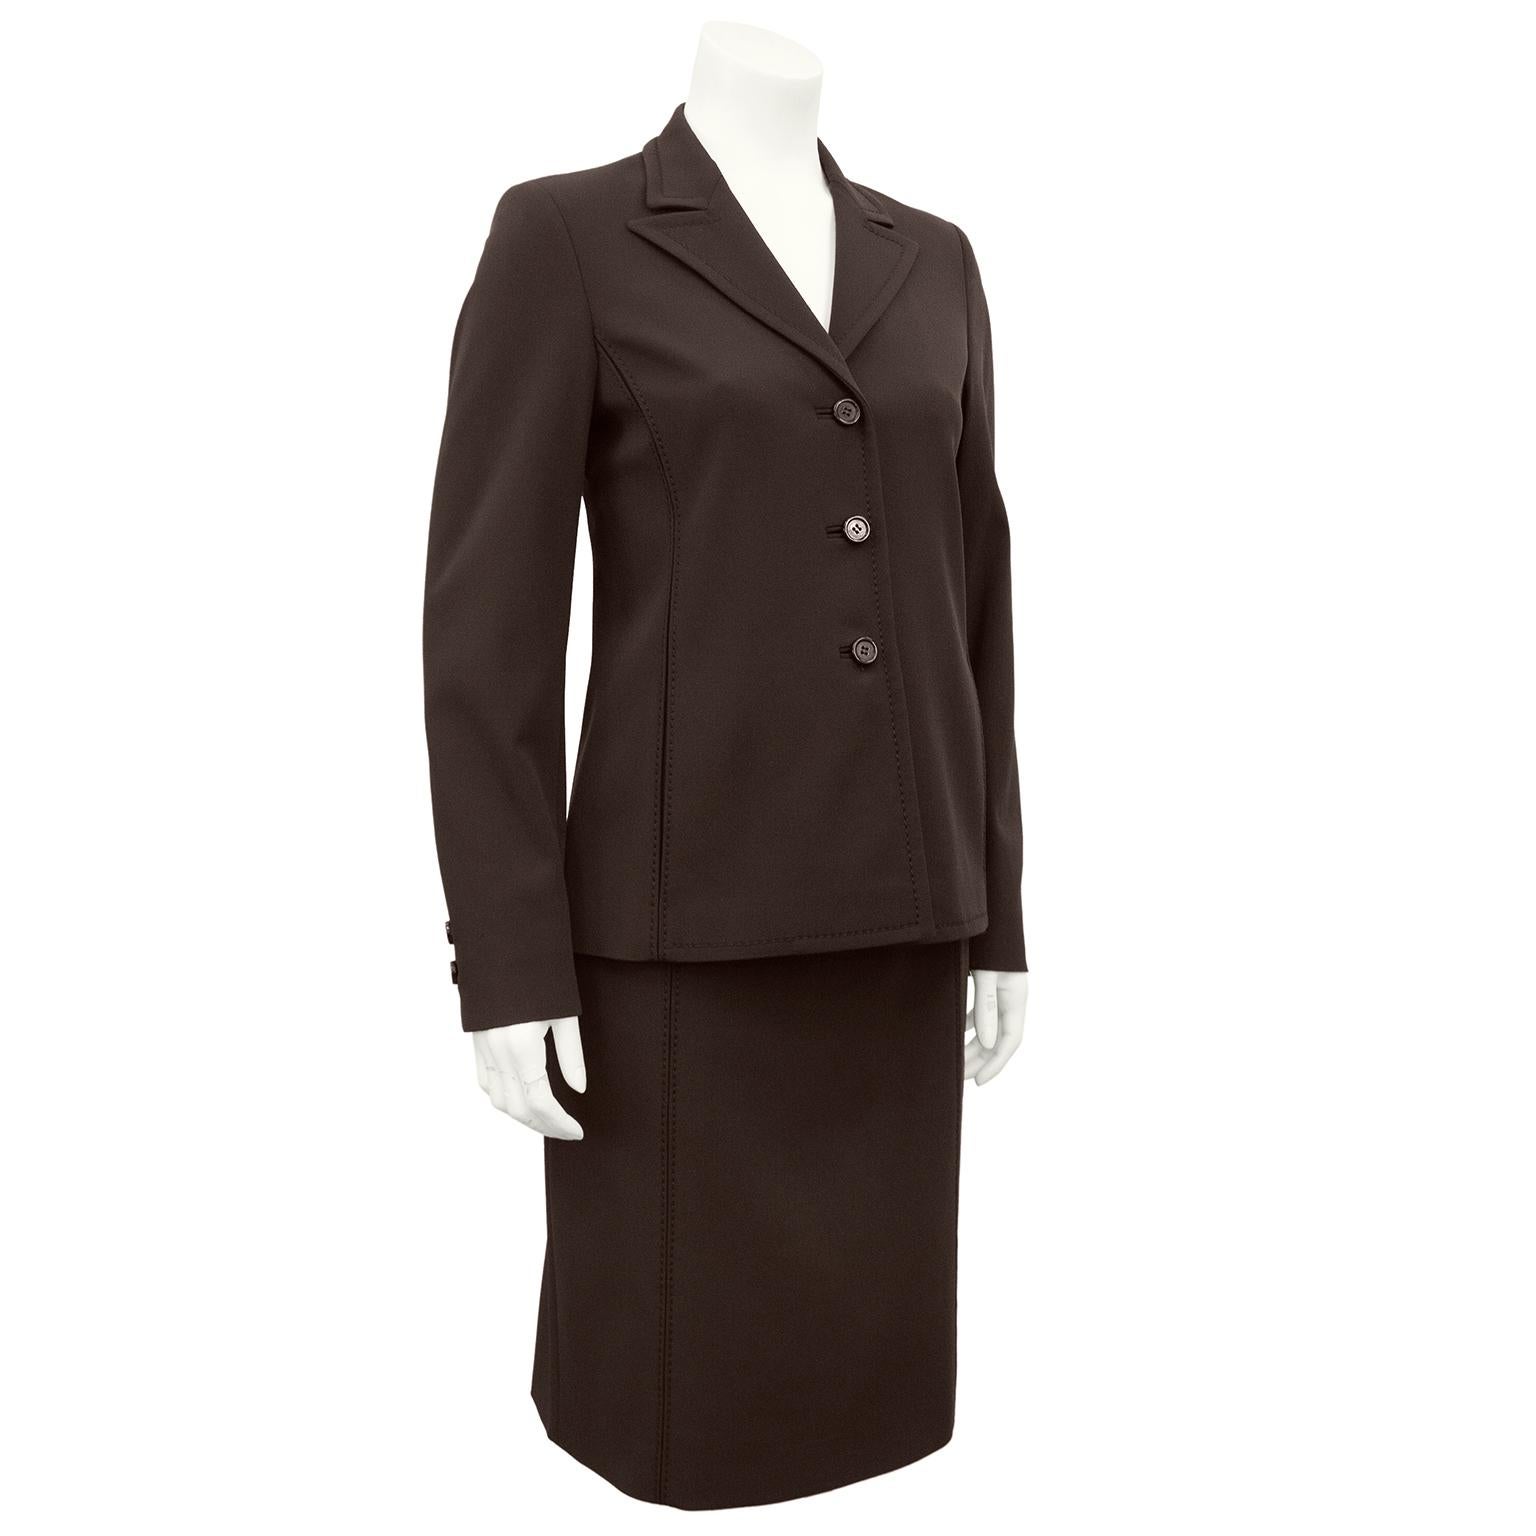 1990s brown Prada skirt suit made from Prada's iconic technical stretch nylon. The fabric wears incredibly well and does not wrinkle. Jacket is a classic blazer with a notched collar and three monochromatic brown plastic buttons and top stitching.